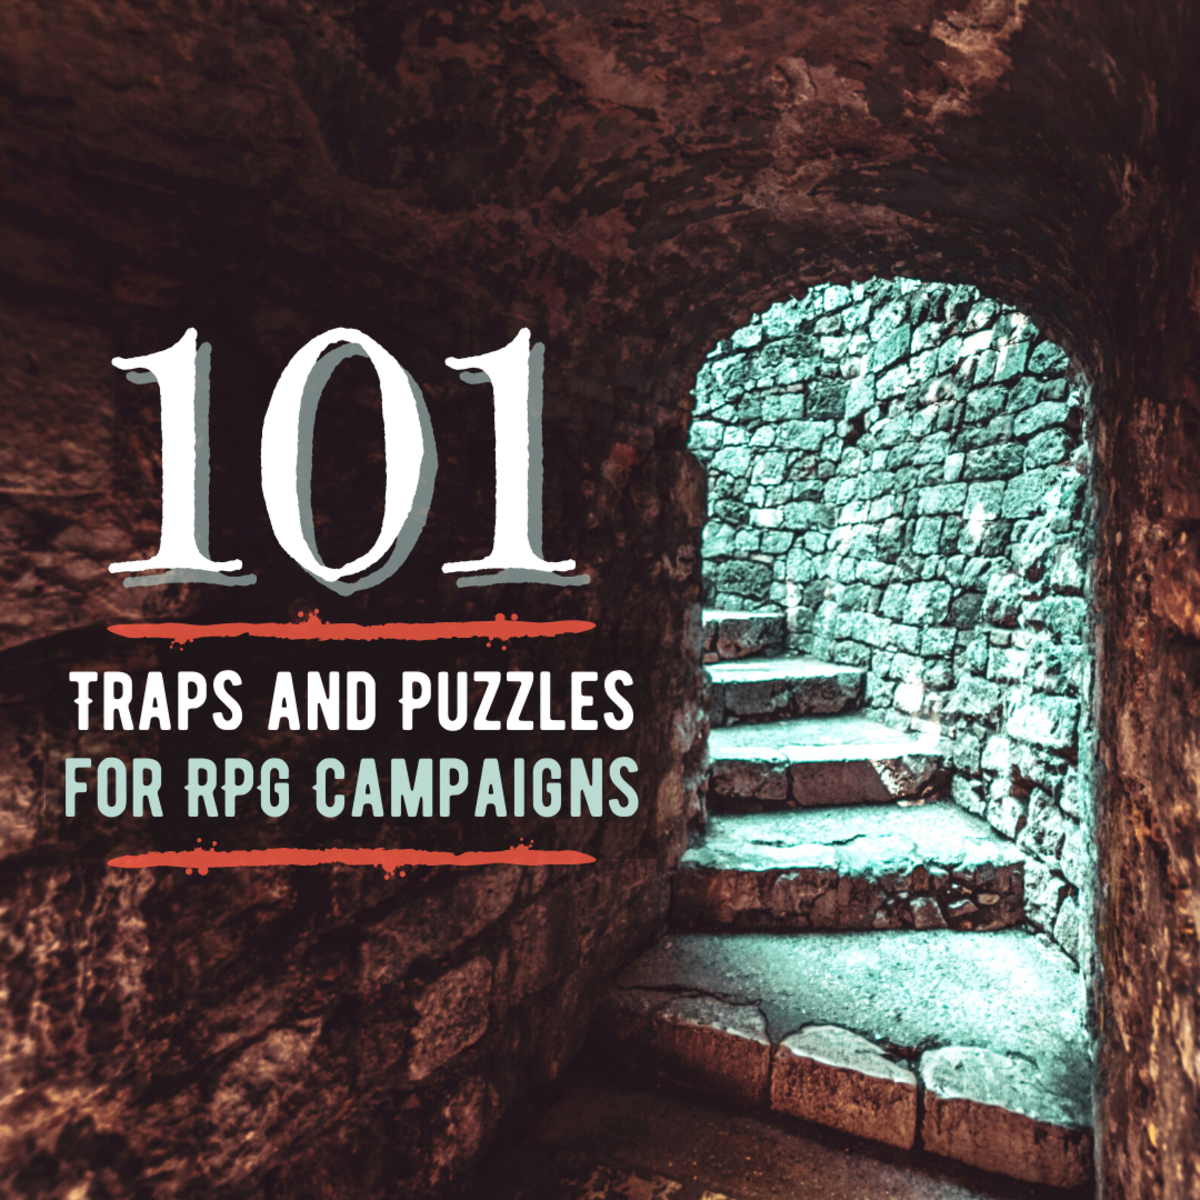 Need some new ideas for challenging, stumping, and tormenting your players? Here are 101 traps, puzzles, encounters, and more to help DMs keep things dangerous.